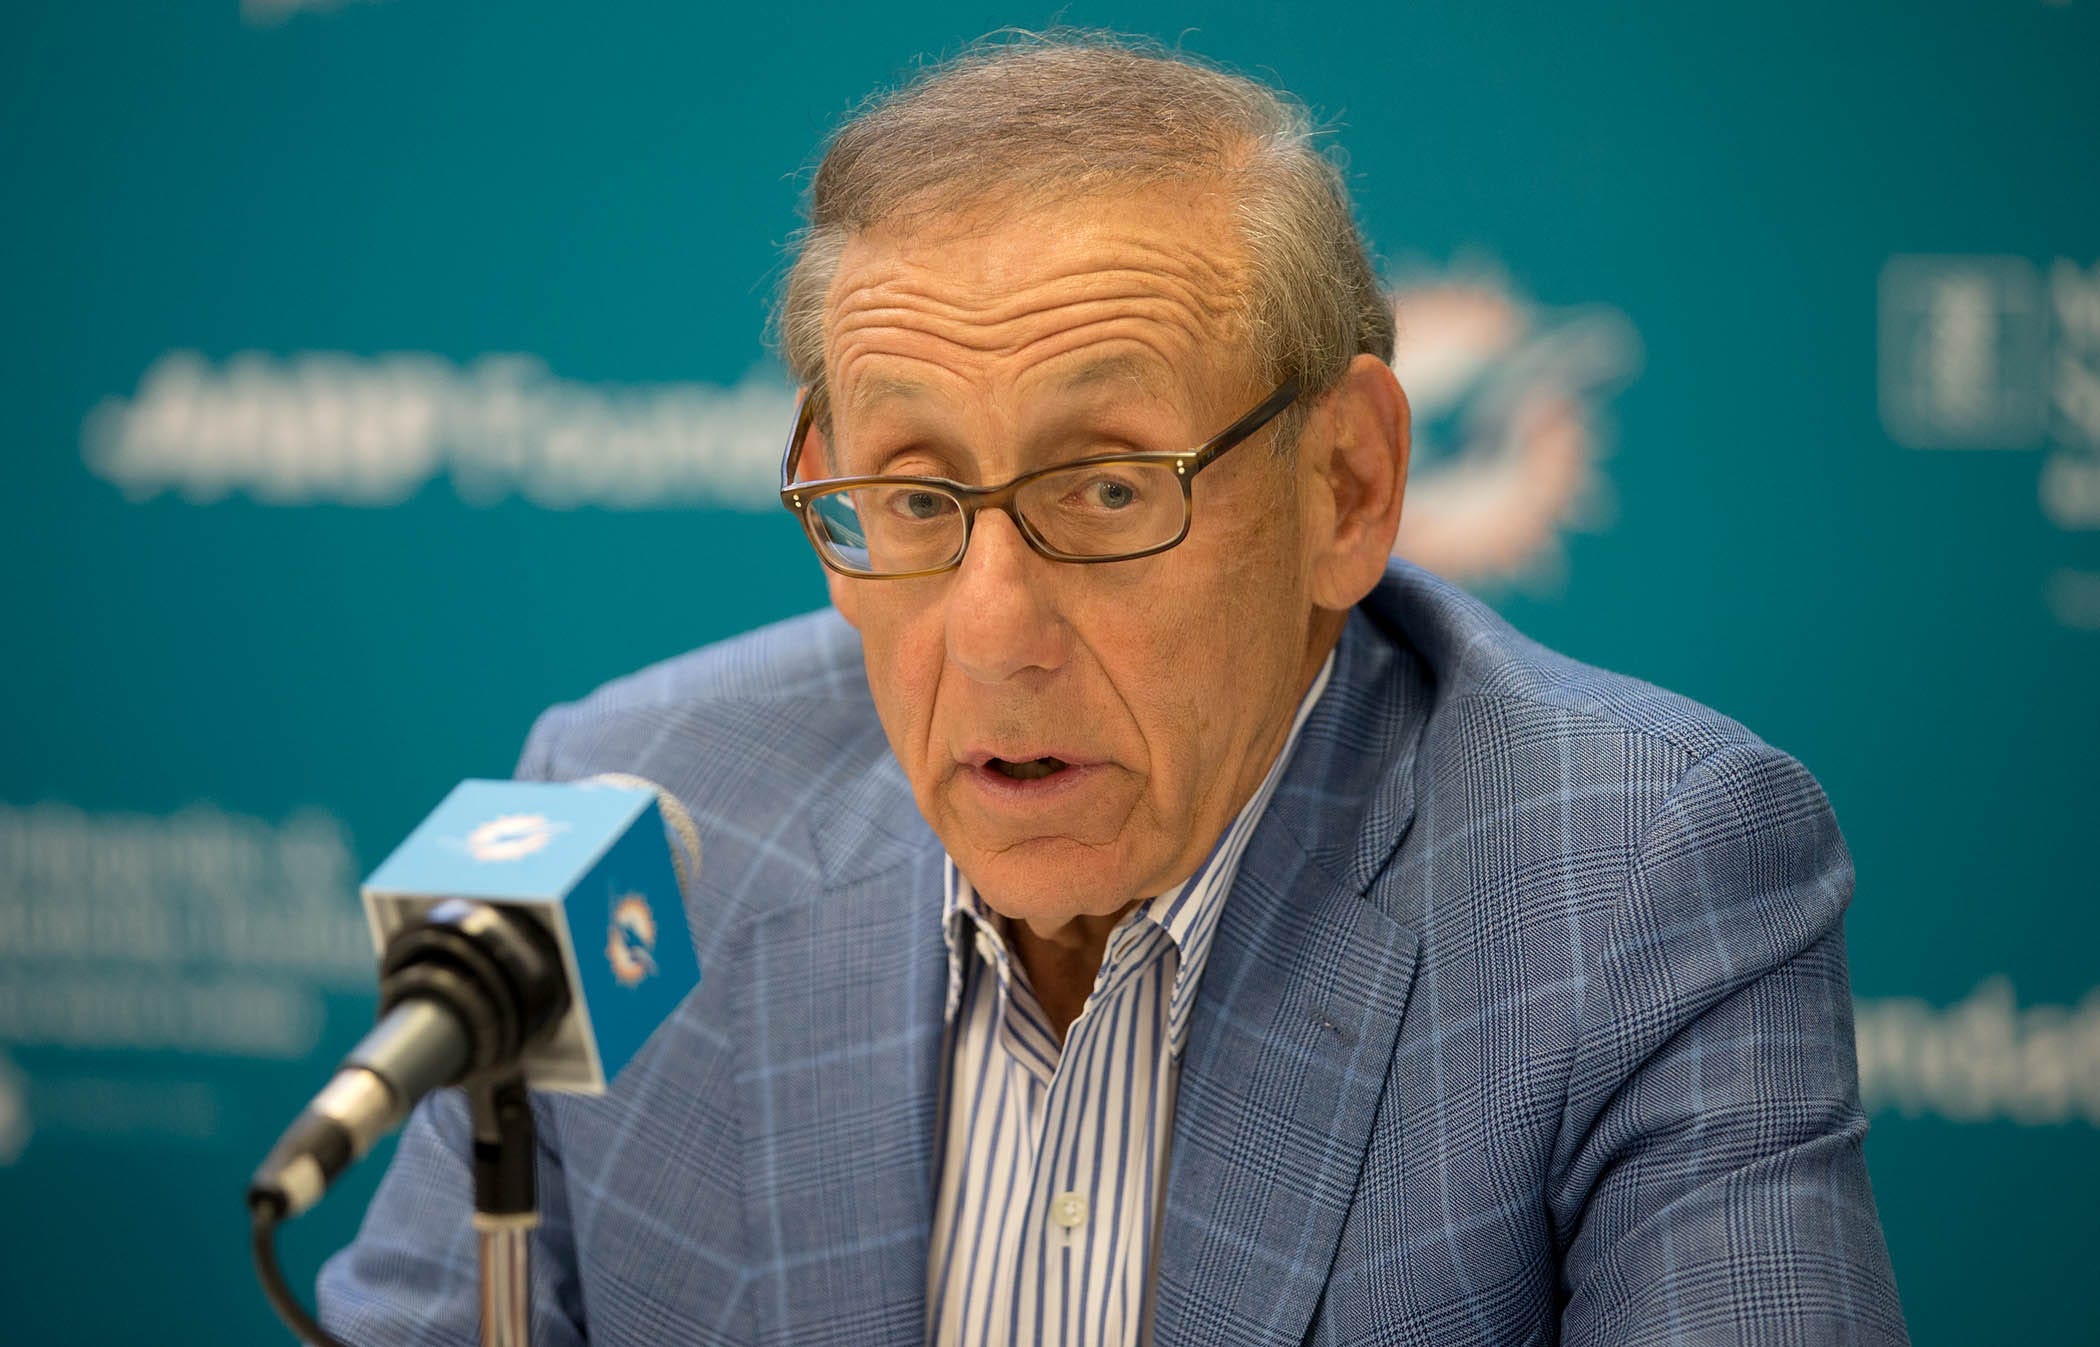 NFL lets Stephen Ross off easy with Dolphins' punishment while letting Brian Flores down | Opinion